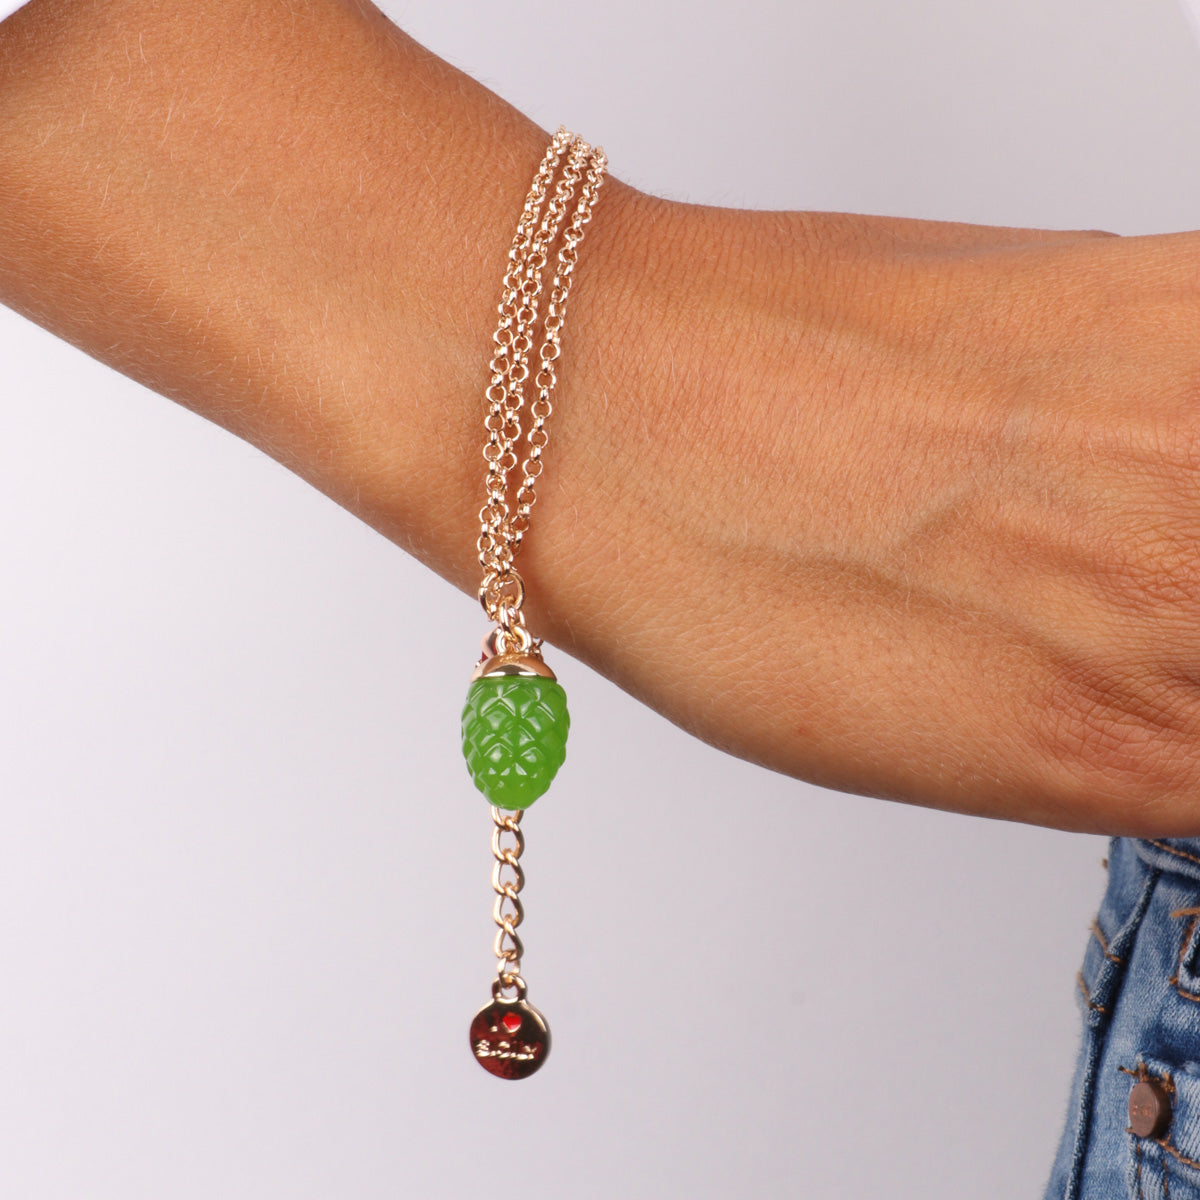 Metal bracelet with green charming pine -shaped pendant